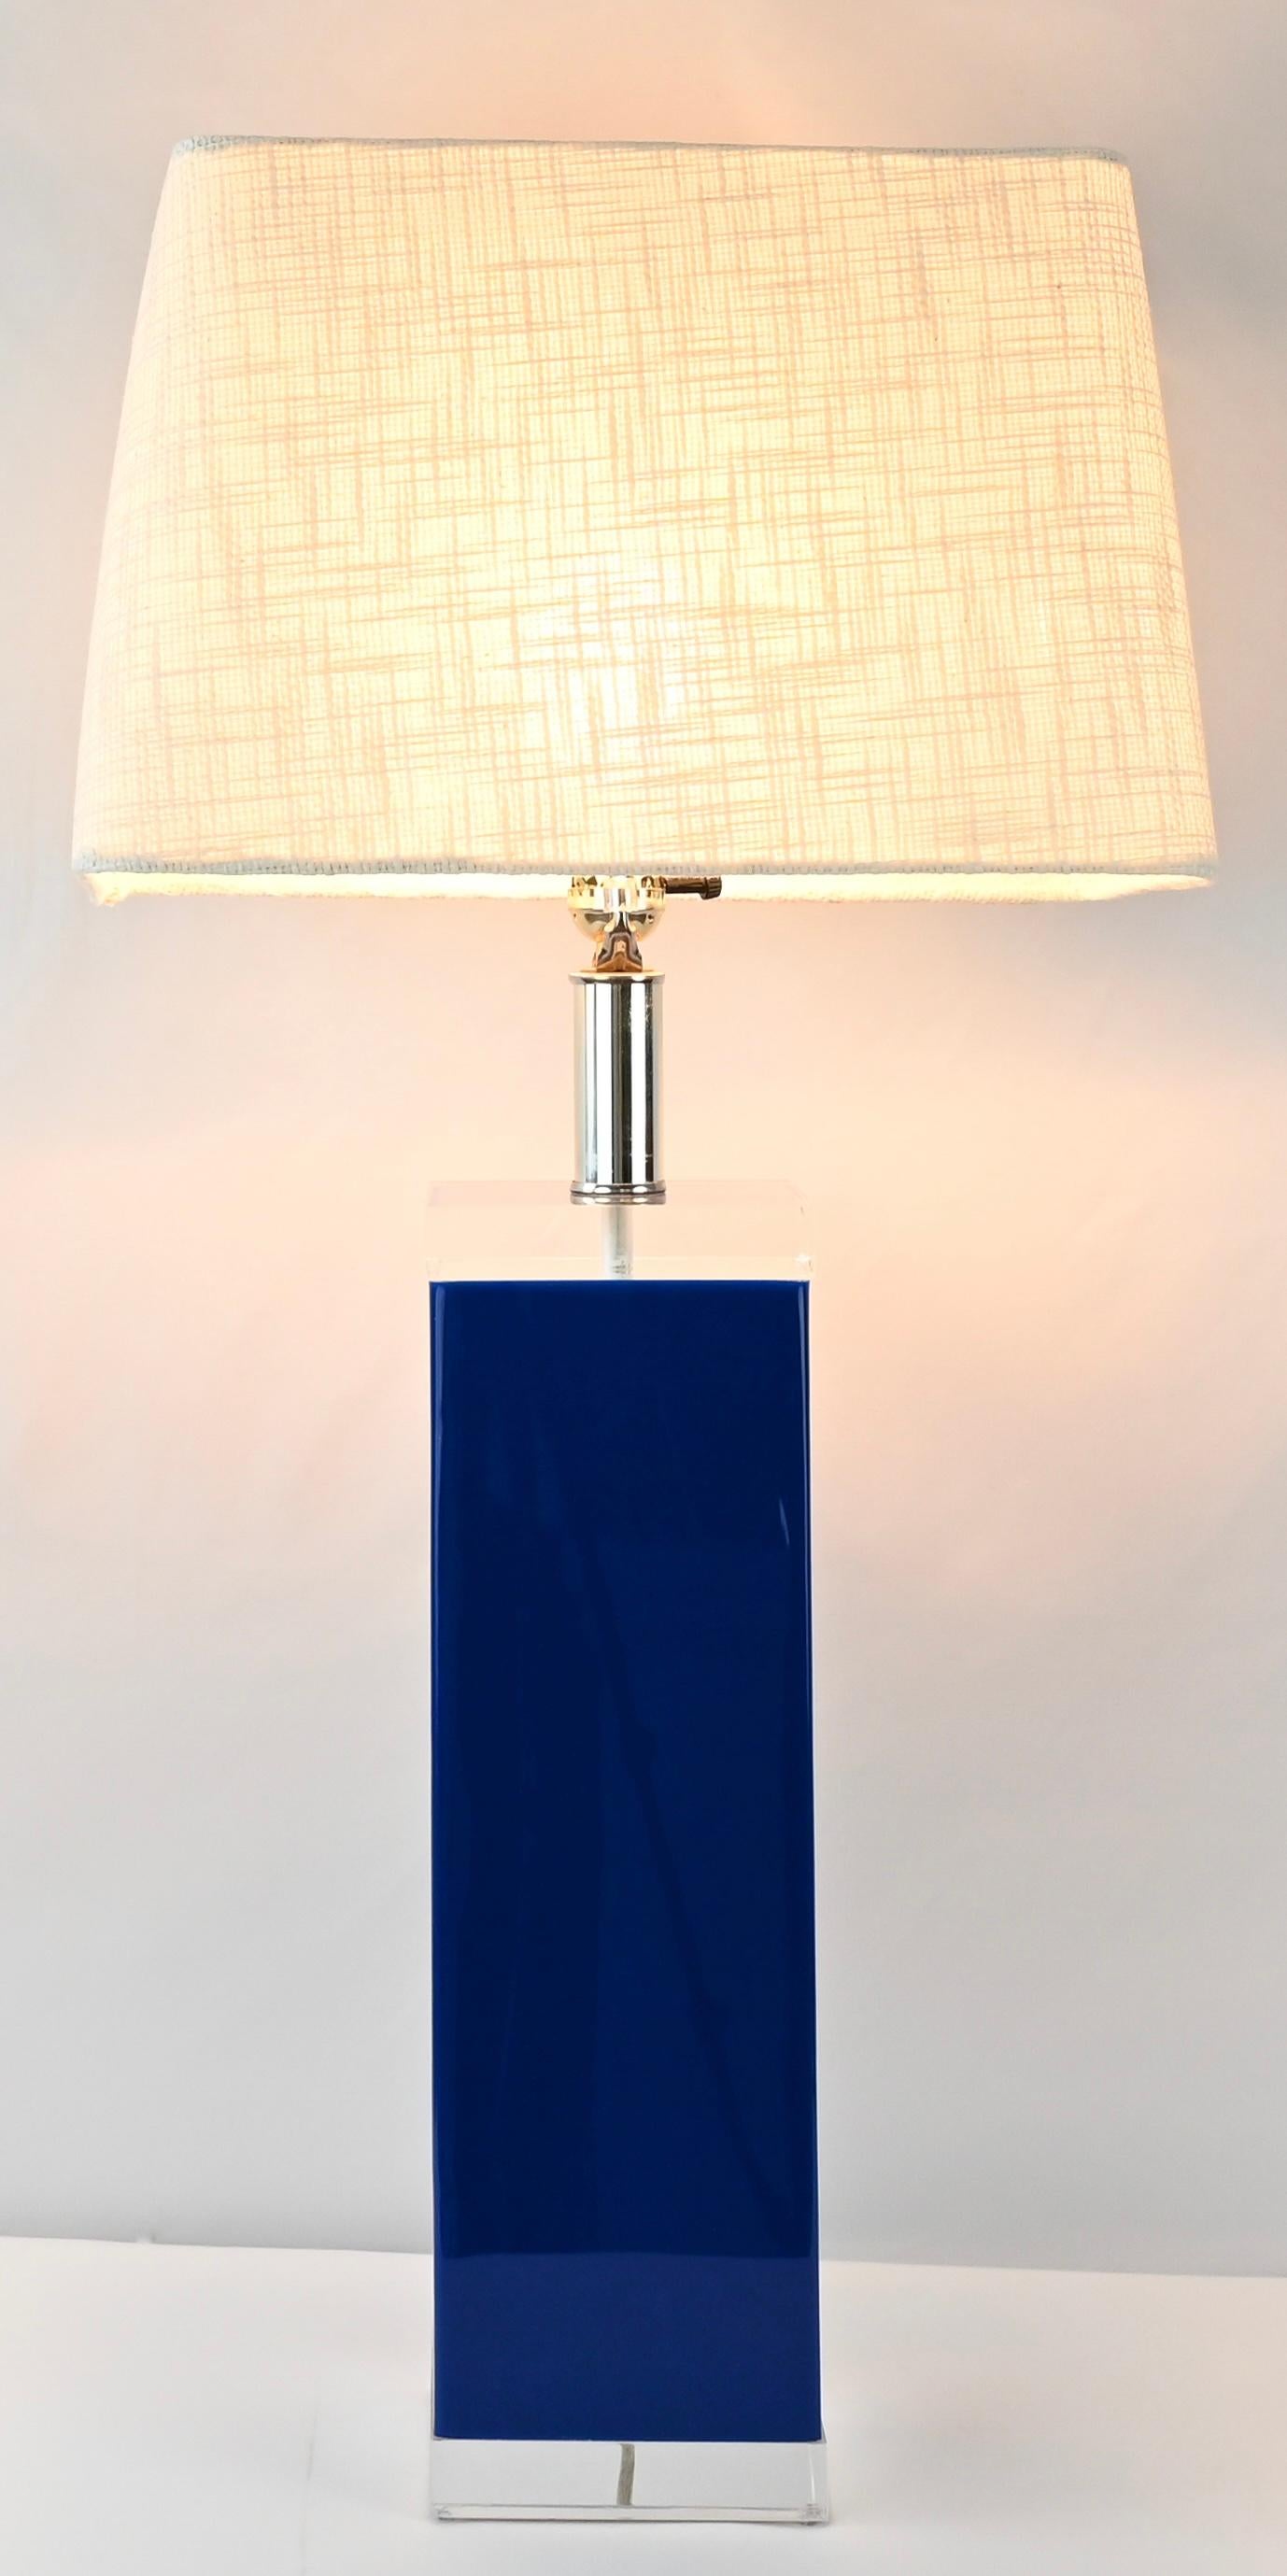 A very good quality pair of George Bullio lucite table lamps designed and crafted with great details. Very pleasing blue colored lucite frame on top and bottom with crystal clear lucite blocks. Chrome stand to hold the bulb and shade. Refined and